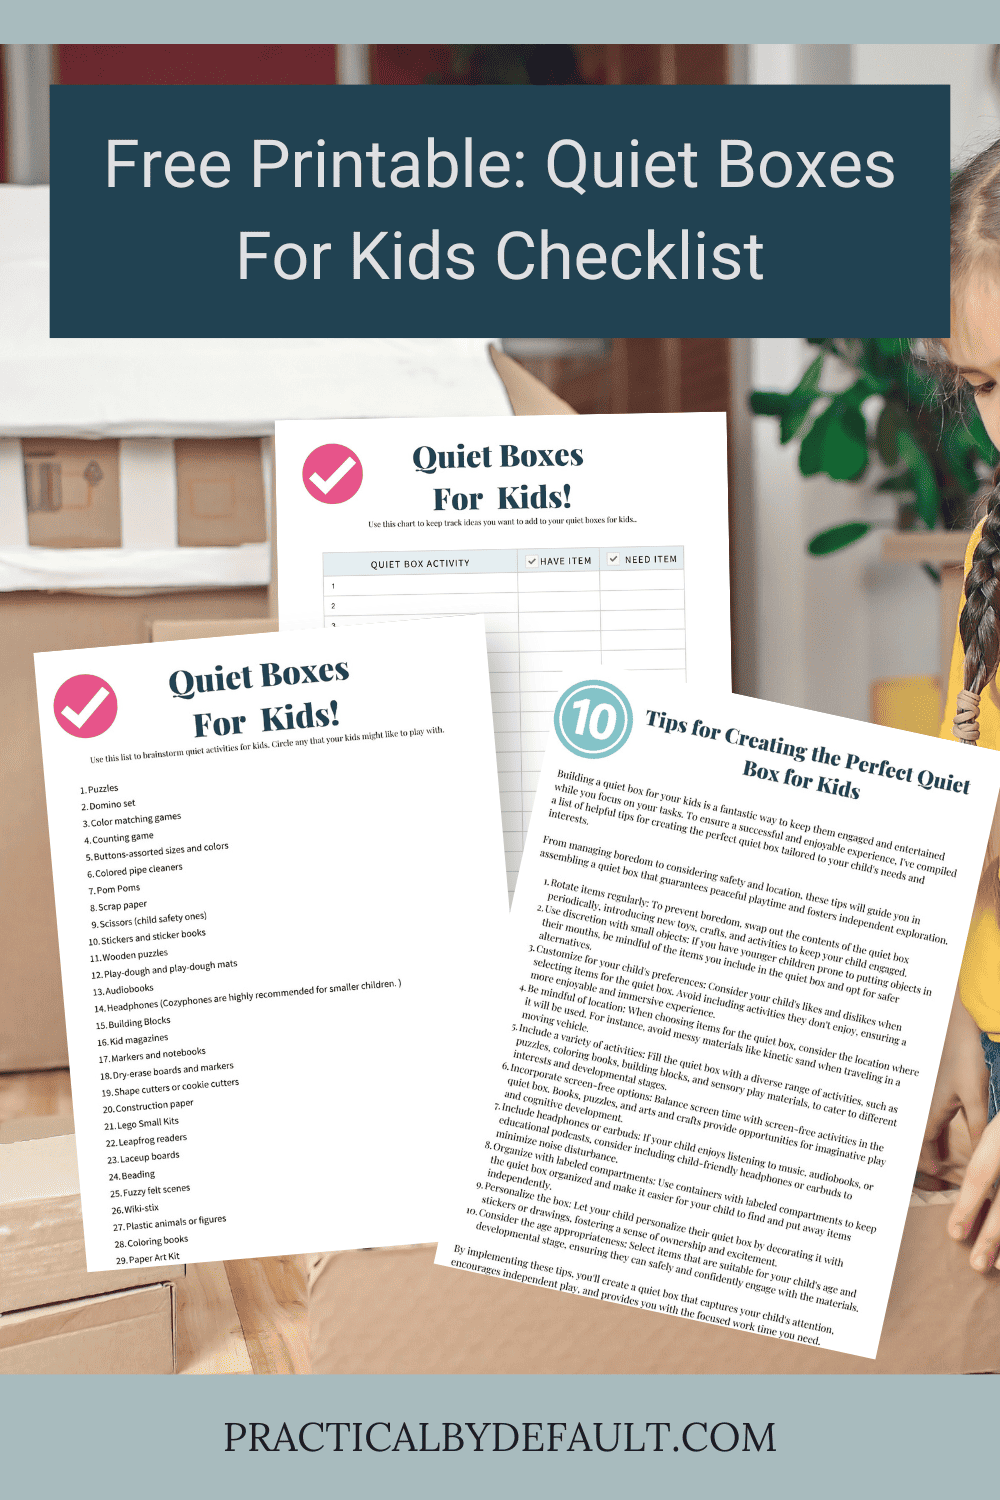 Free Printable: Quiet Boxes For Kids Checklist